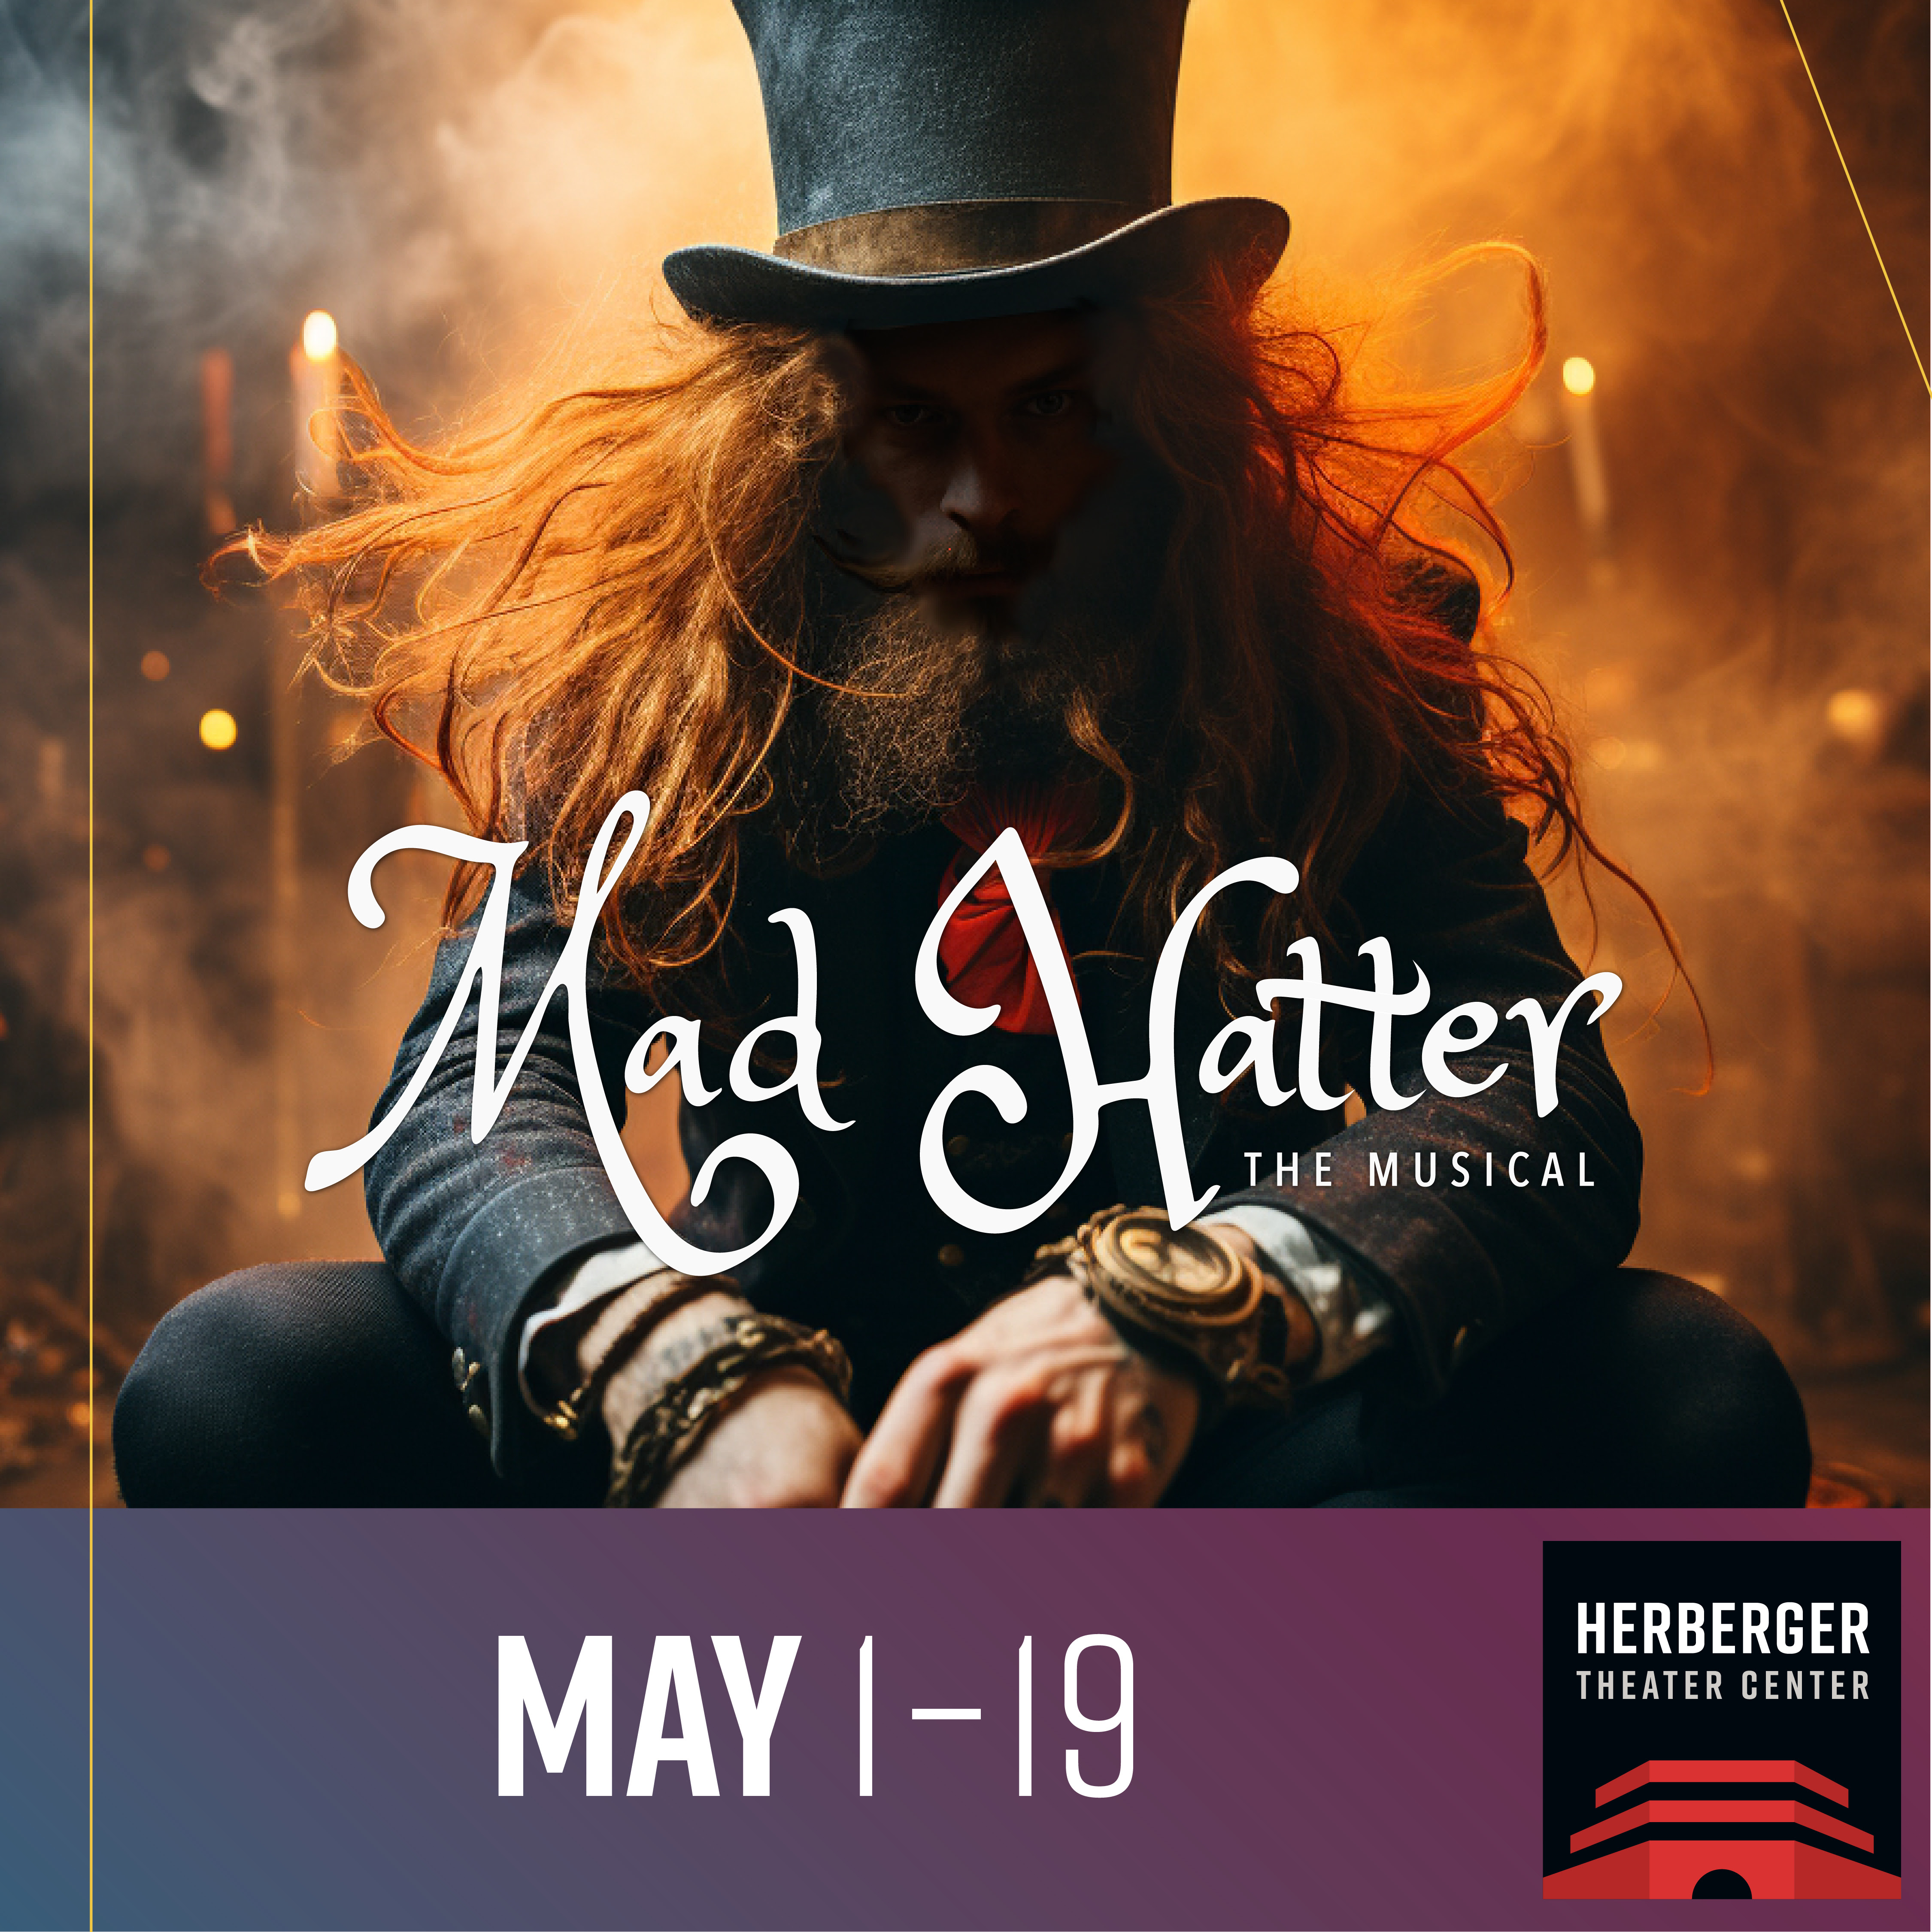 MAD HATTER THE MUSICAL